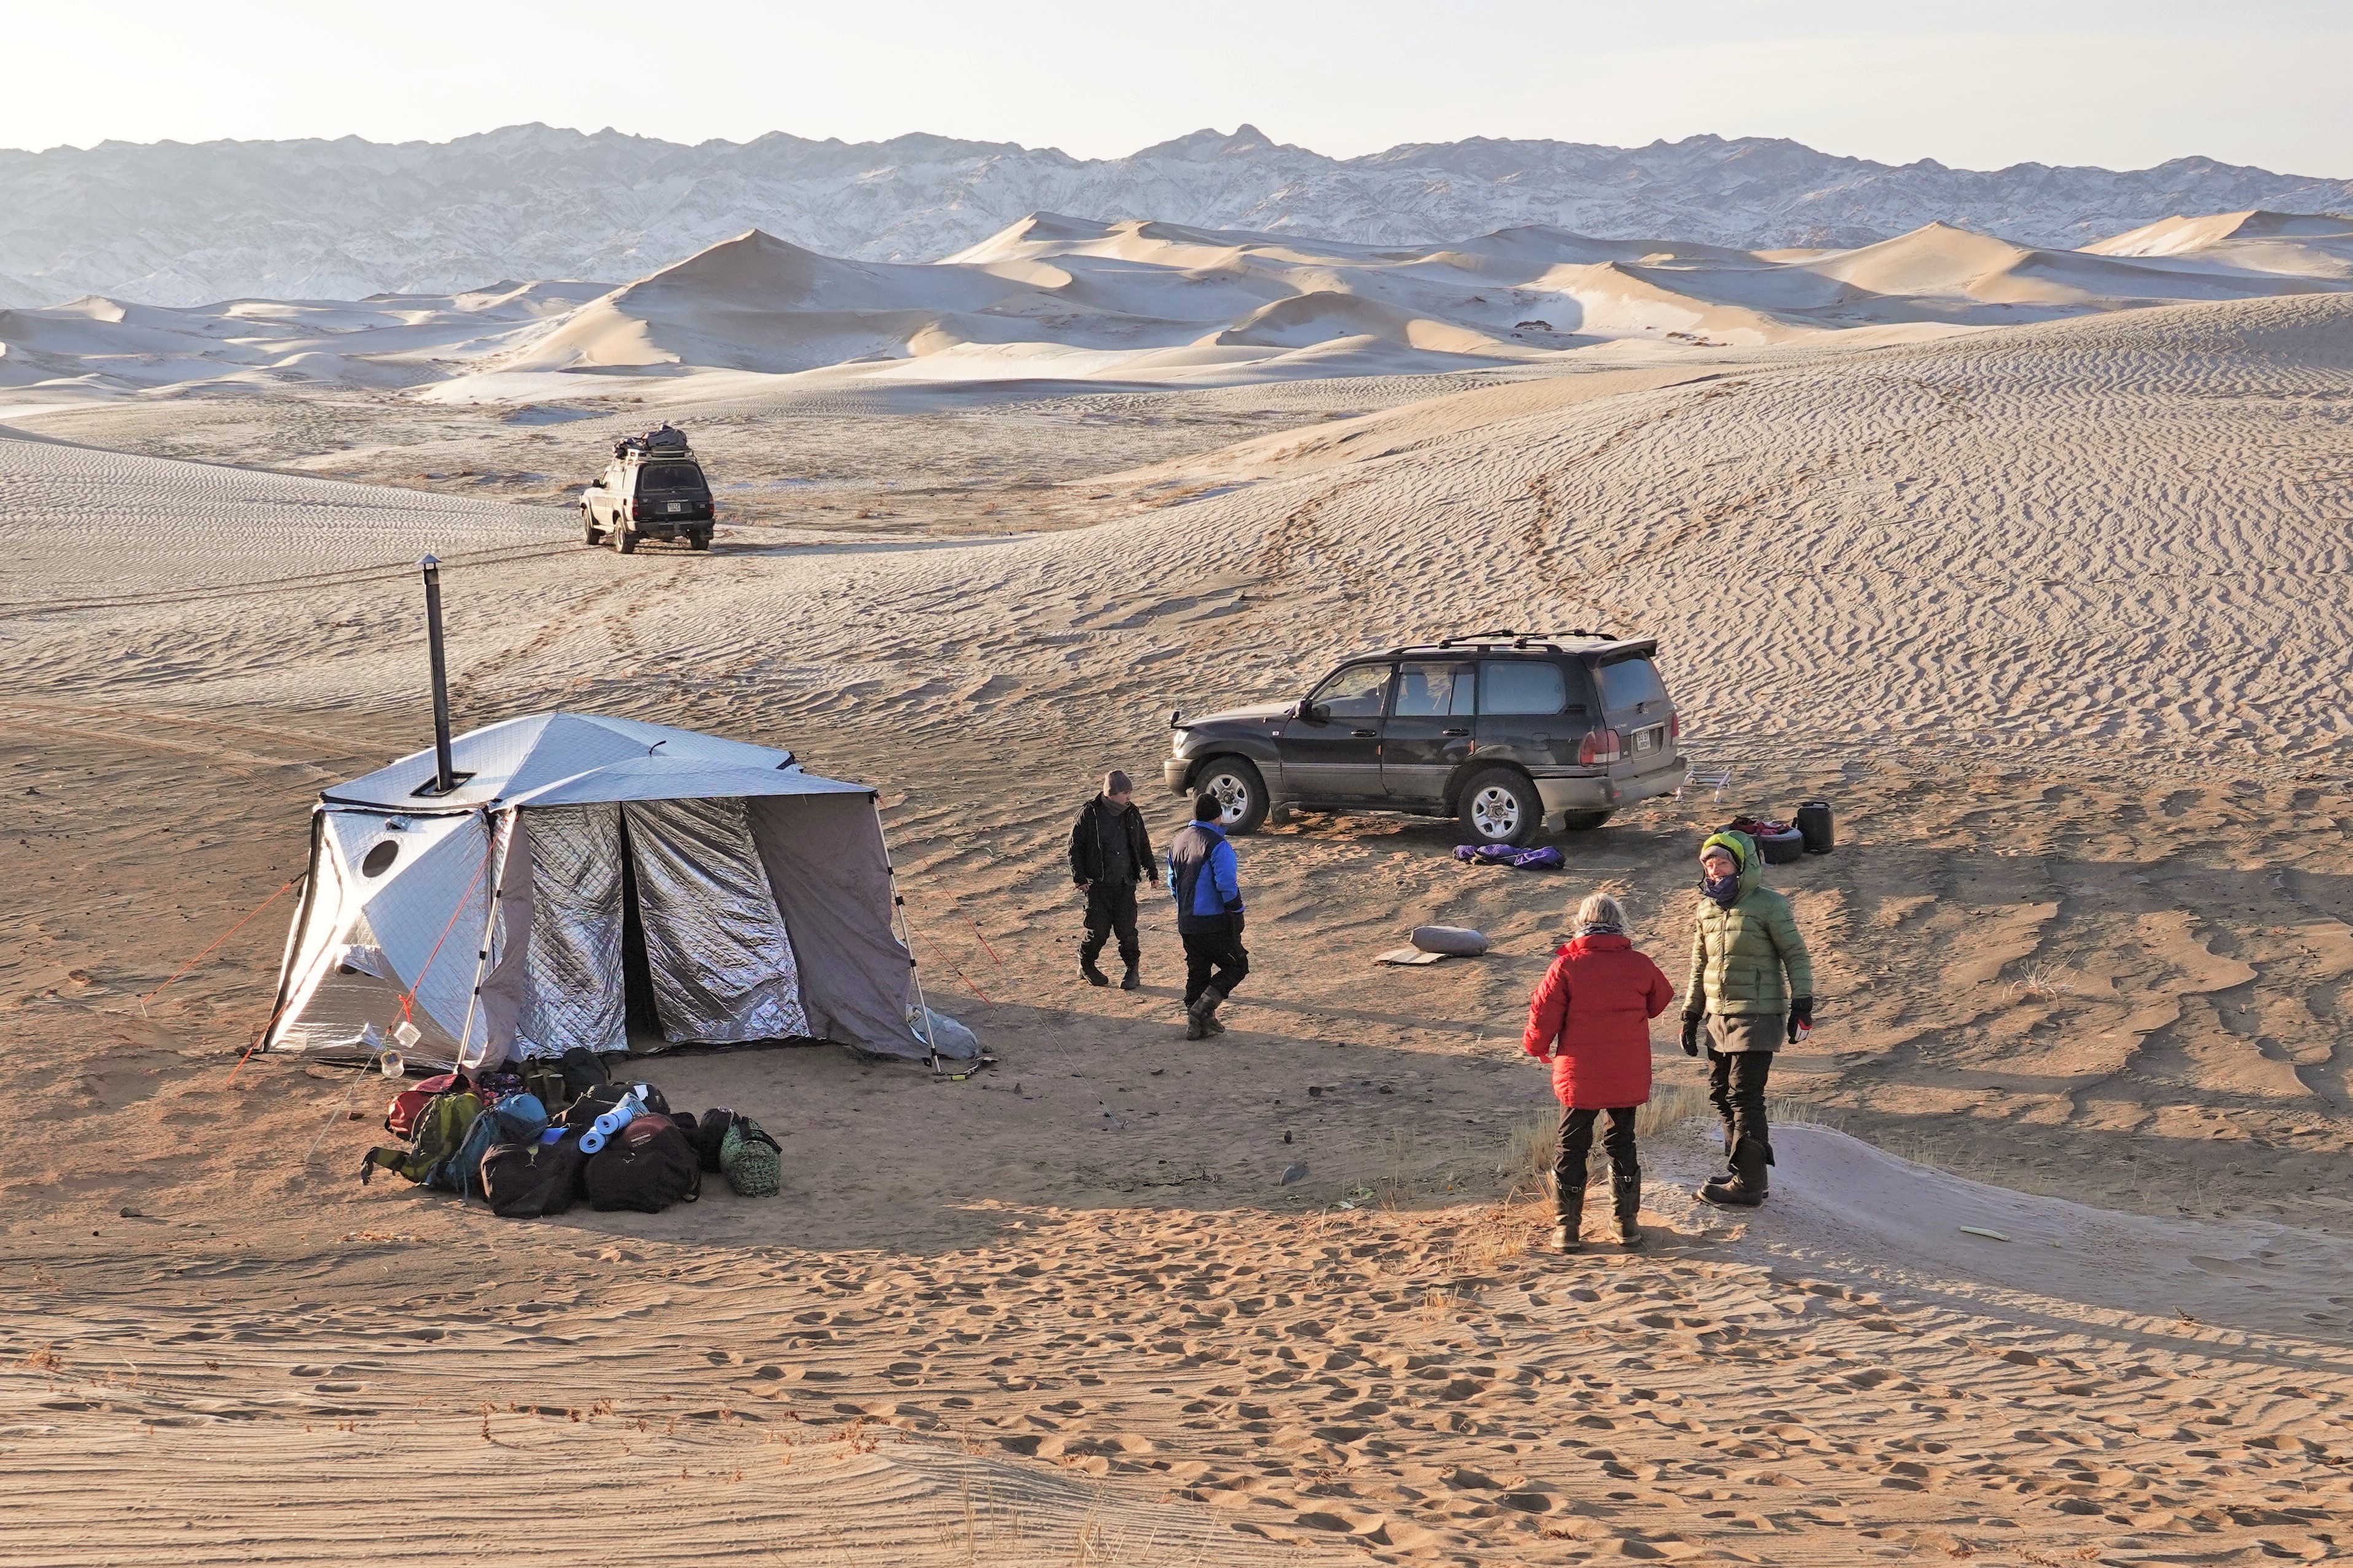 Winter Camping in Mongolia's Gobi, Stone Horse Expeditions